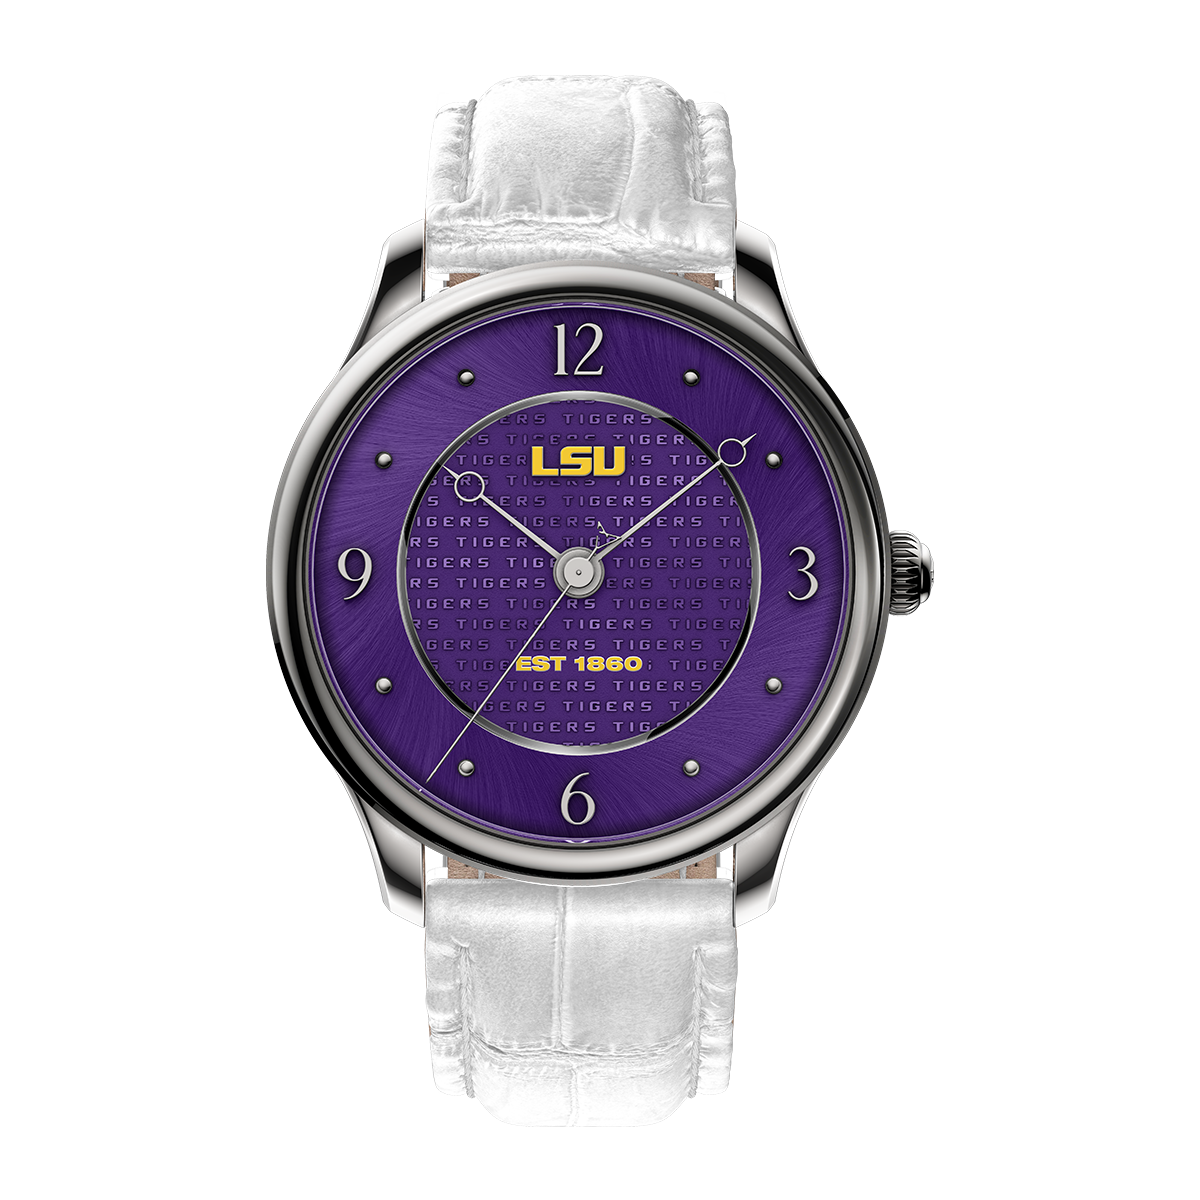 Aletheia LSU Swiss made automatic watch. Front view.